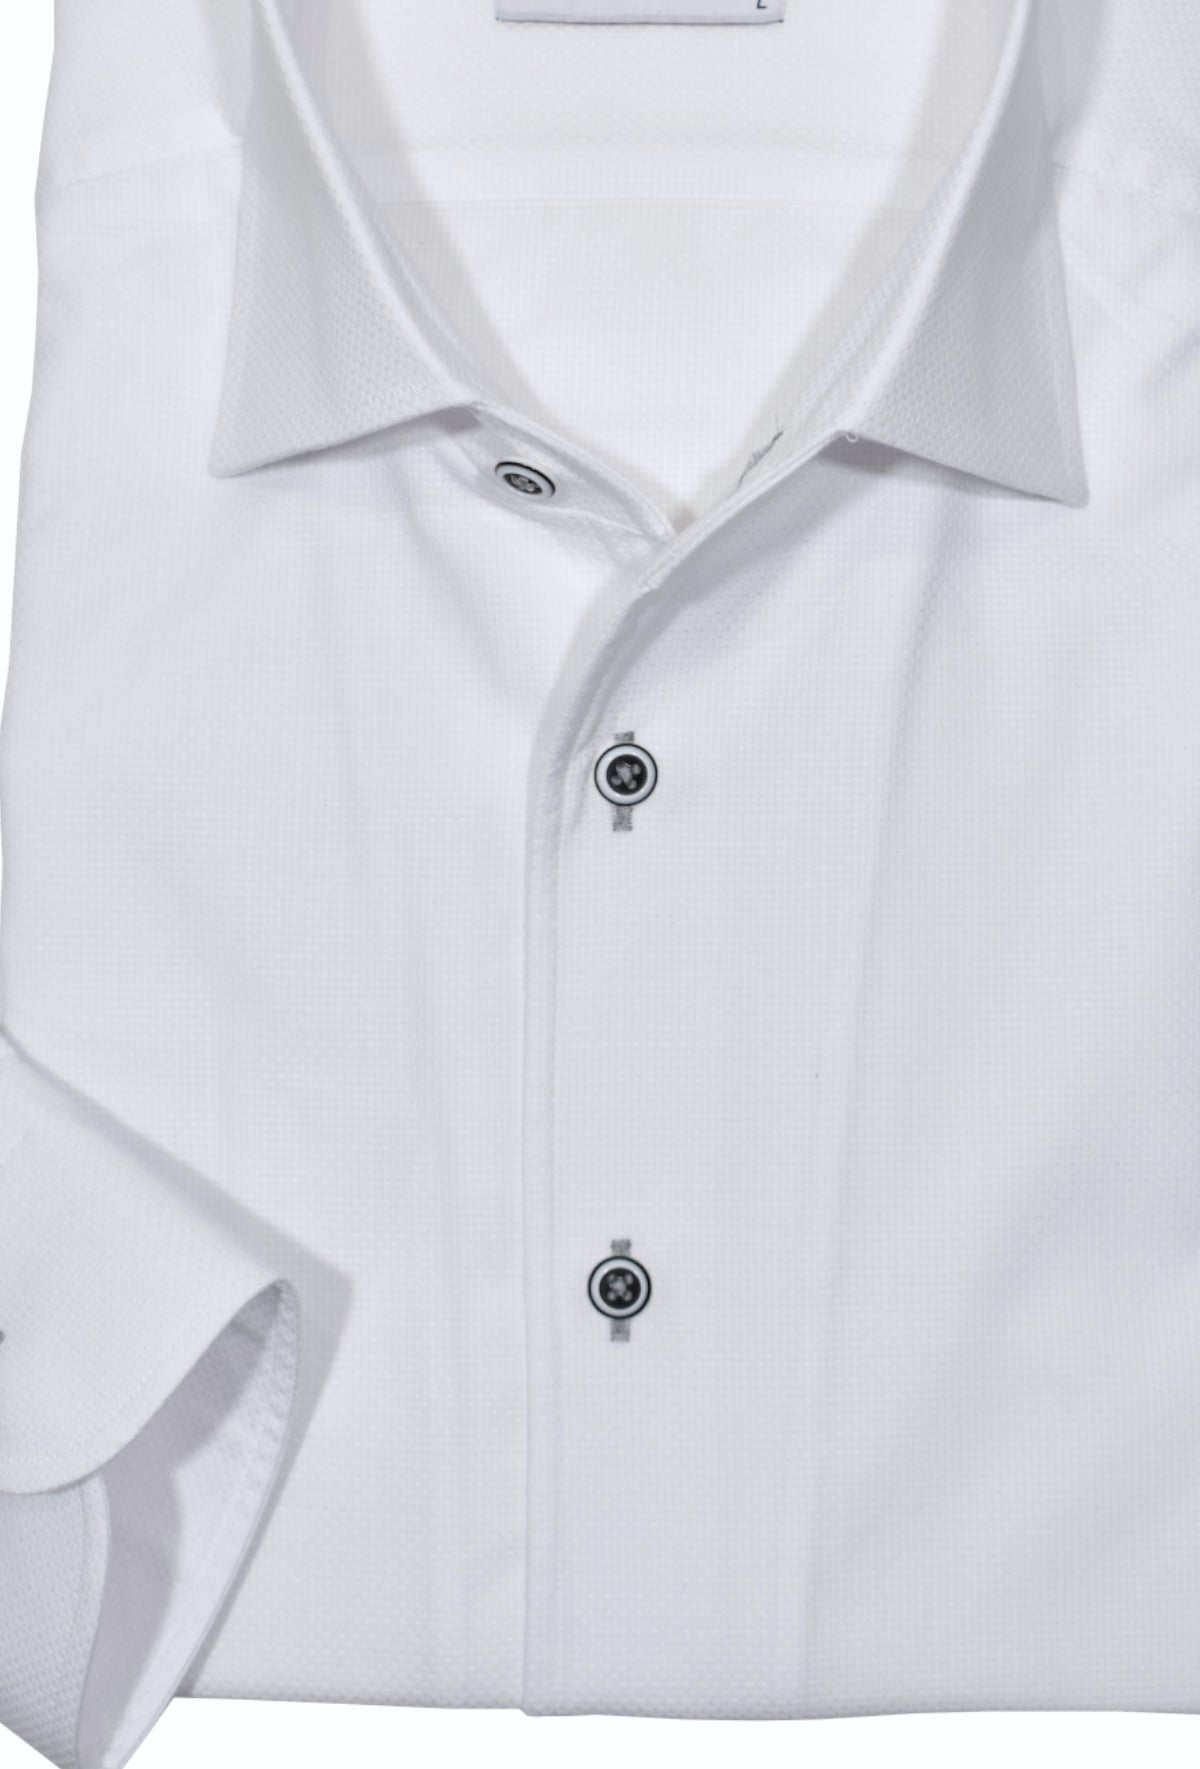 Look your best in this timeless Marcello roll collar shirt. The solid white cotton fabric with a luxurious textured effect is complemented with contrast white and black buttons and finished with black stitching for a stylish look.